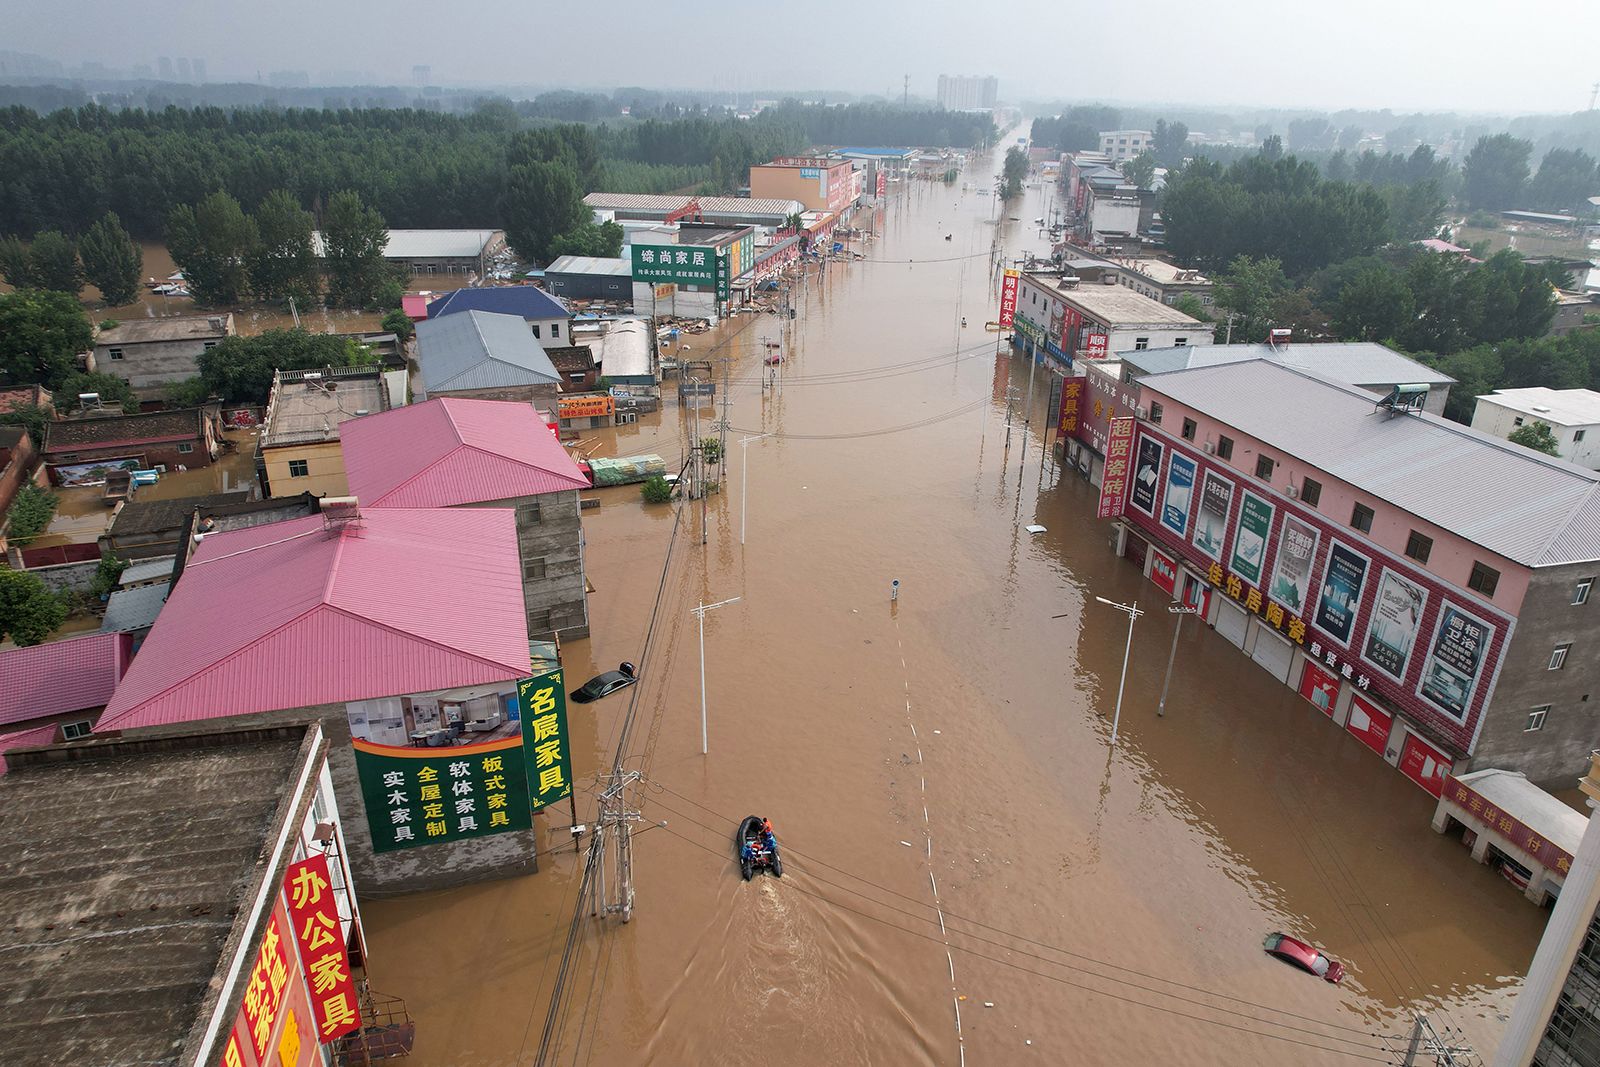 This aerial view shows a flooded village in Zhuozhou after heavy rains on August 2.